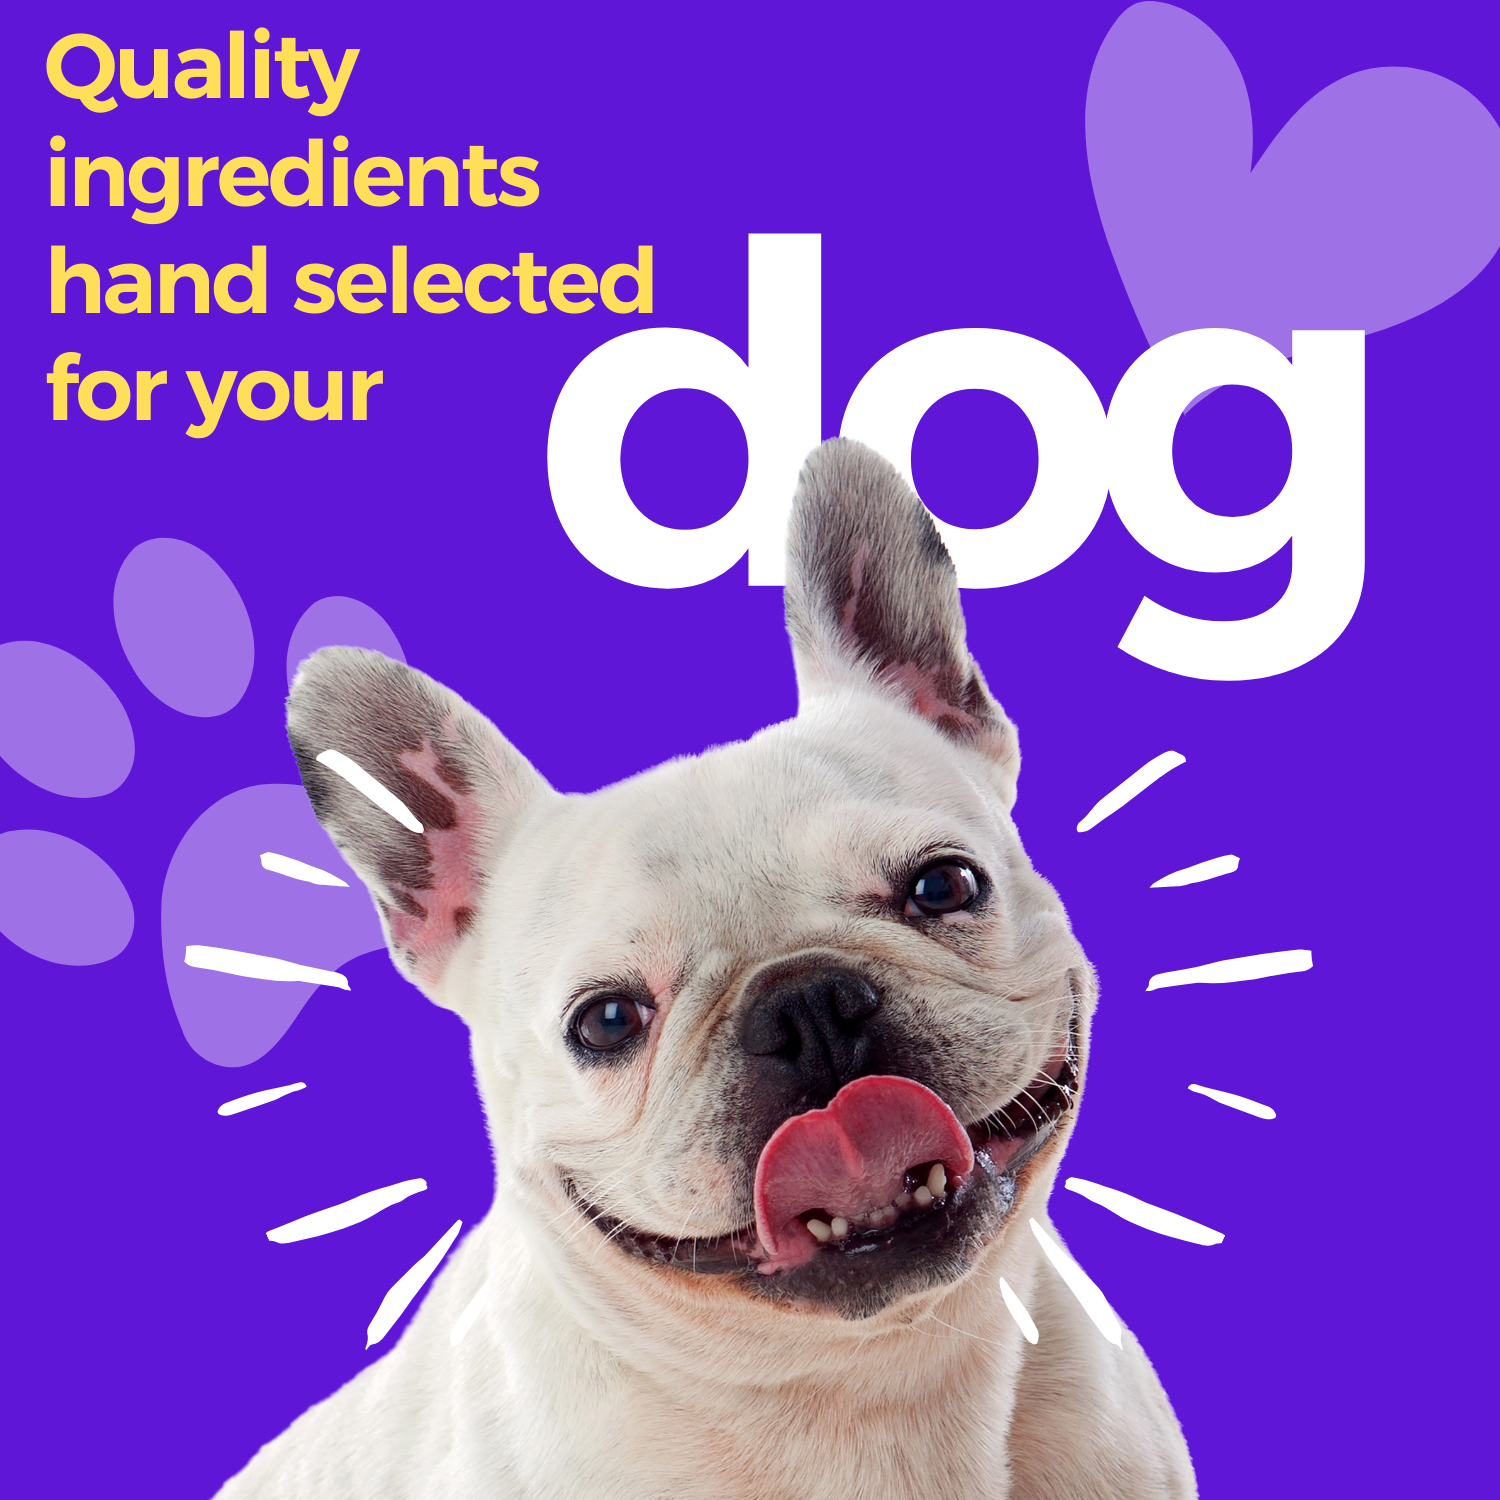 Quality ingredients for your dog